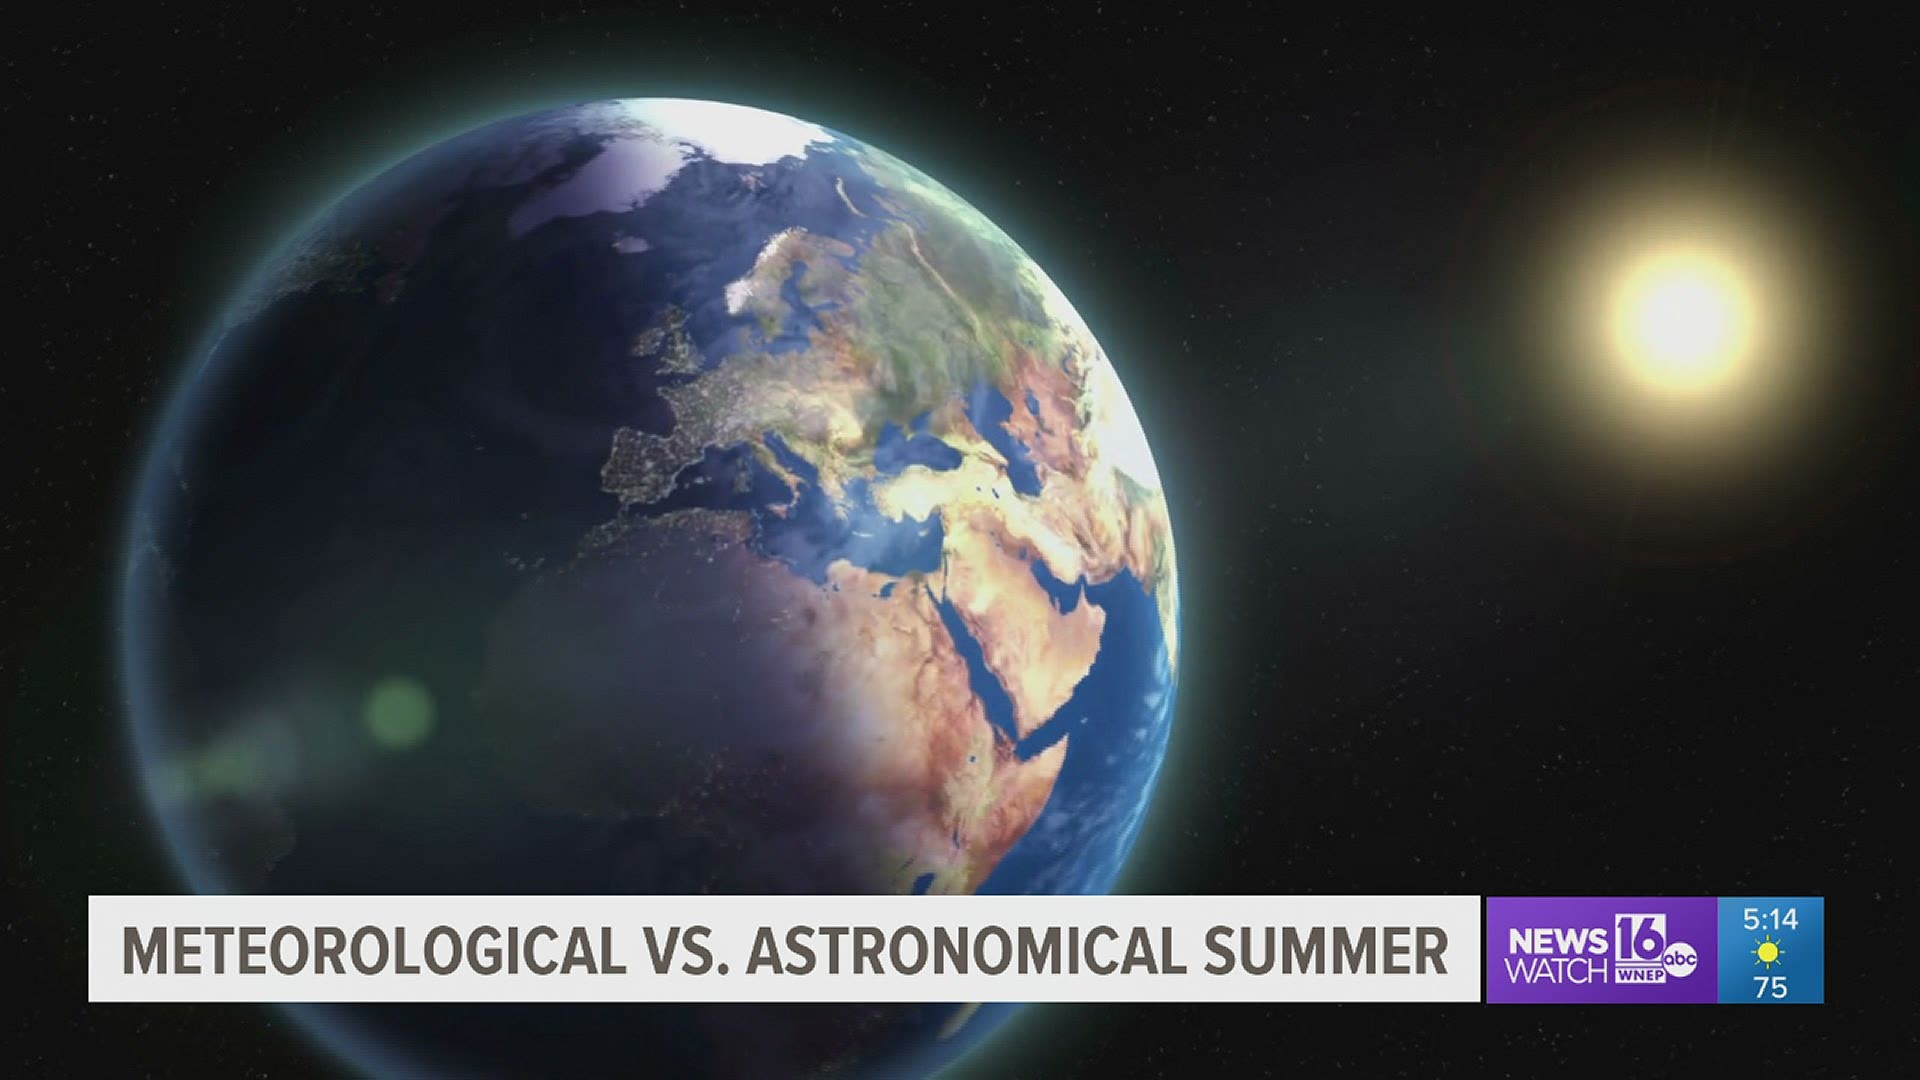 June 1 is the start of meteorological summer and Stormtracker 16 Meteorologist Ally Gallo explains why we use meteorological seasons instead of astronomical.